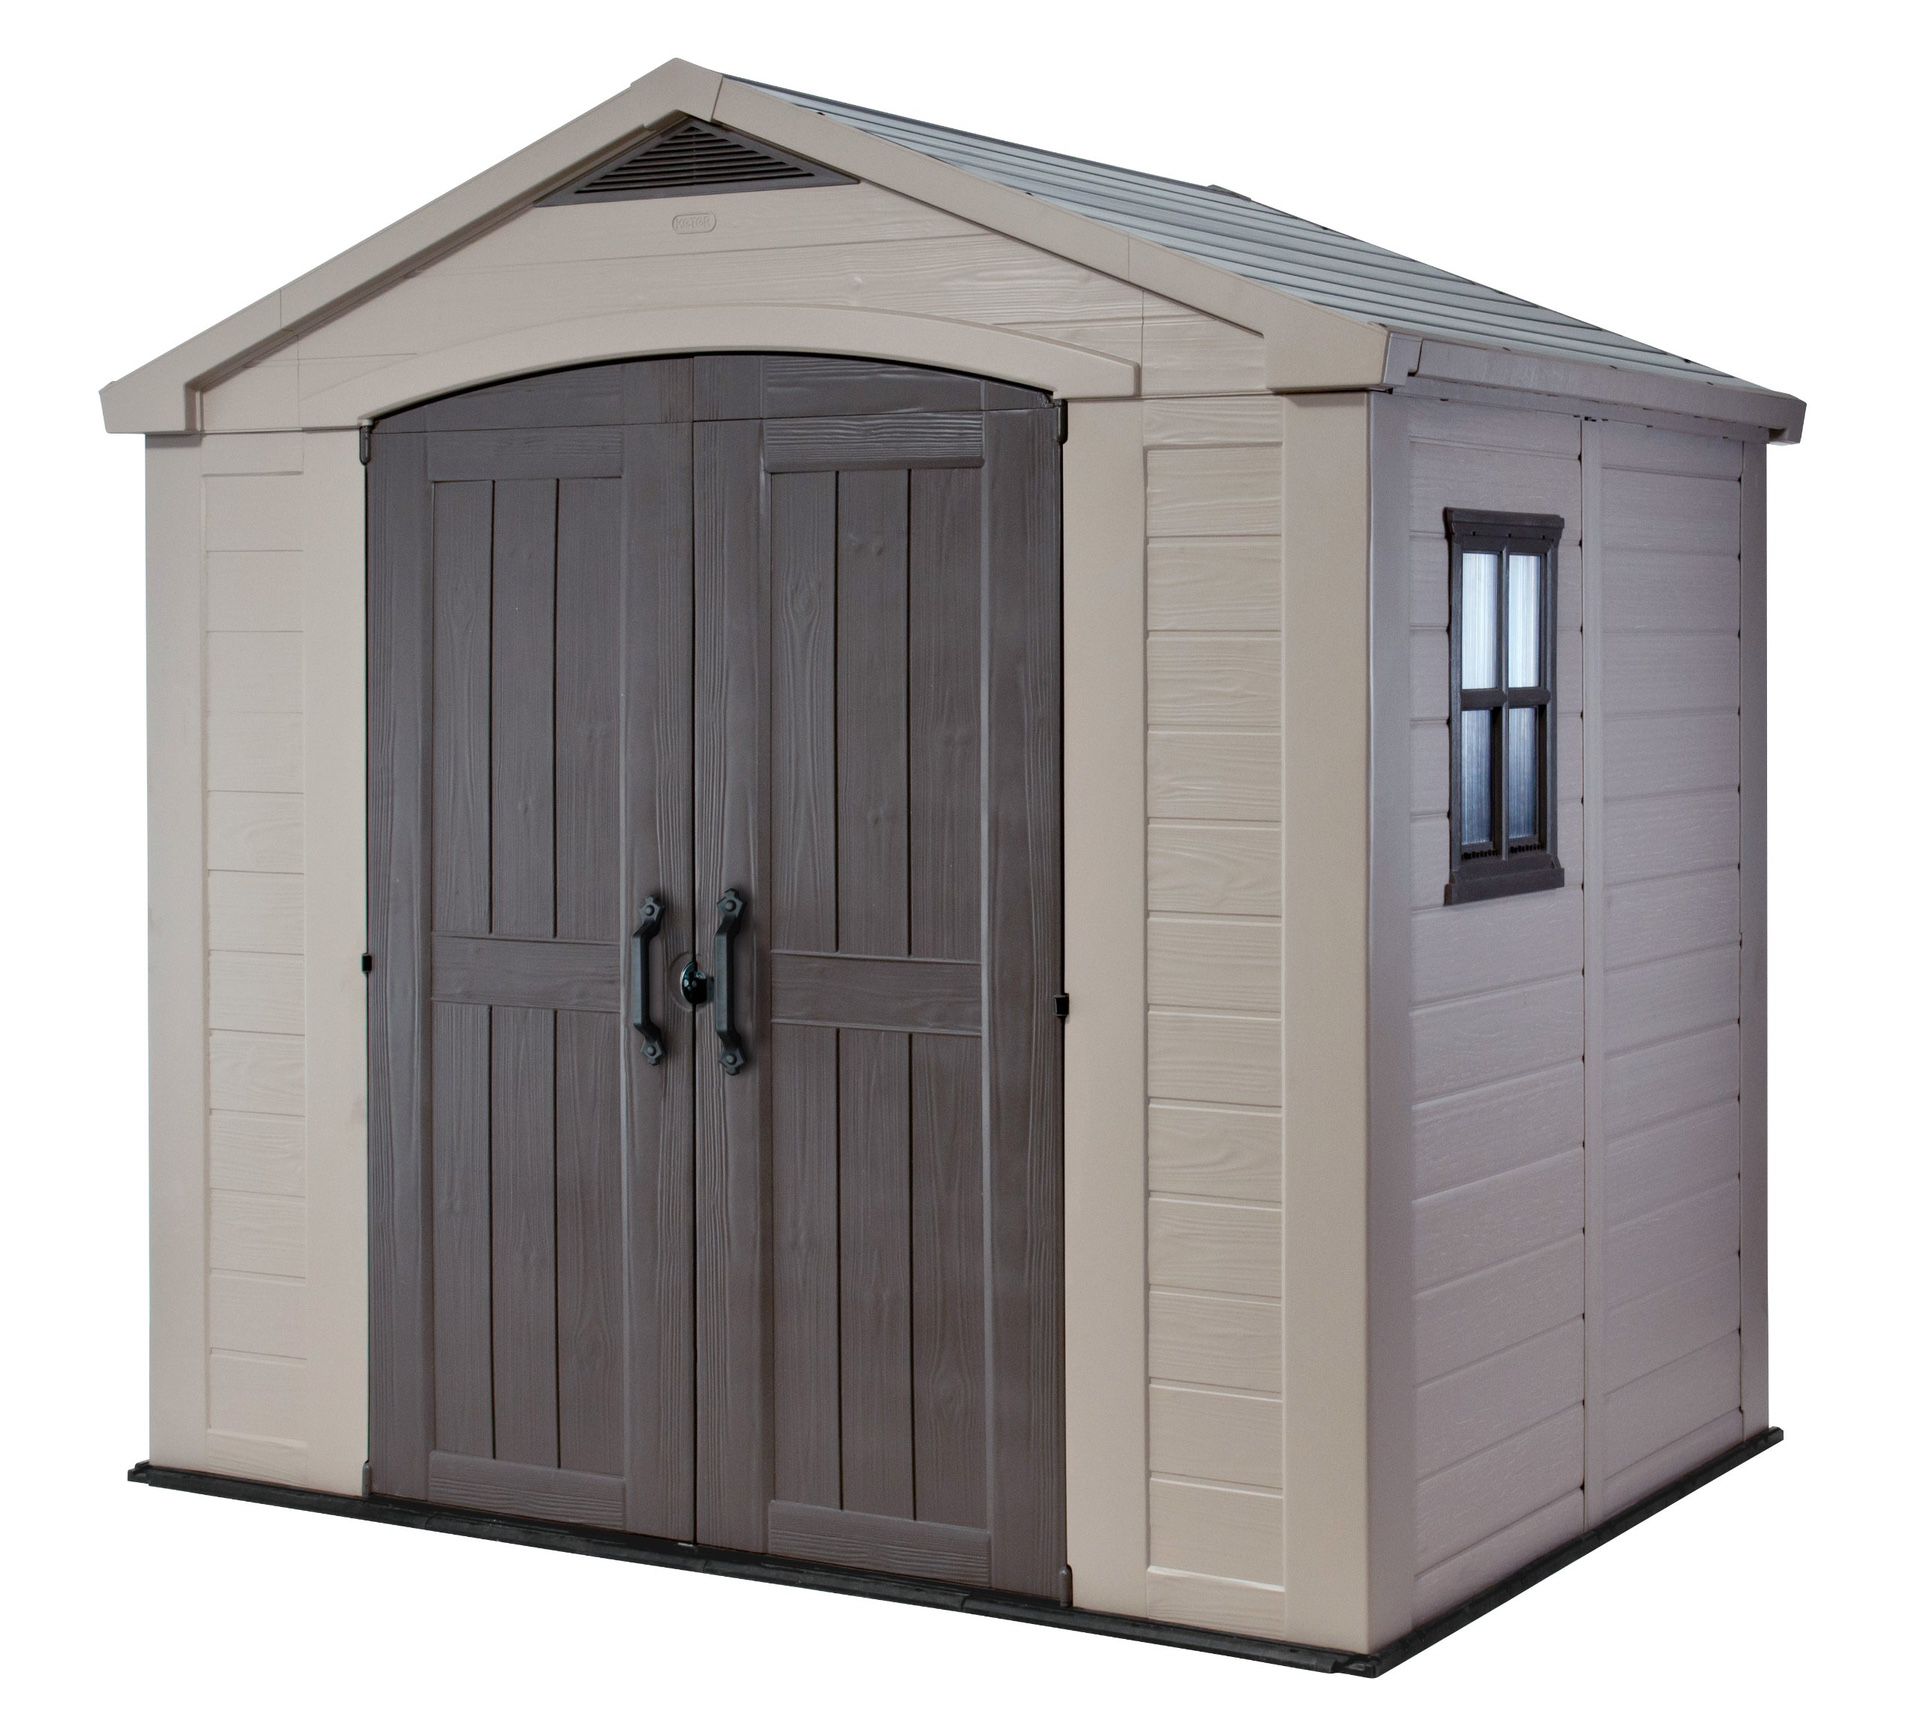 New in box Keter Factor 8x6 Large Resin Outdoor Storage Shed for Patio Furniture